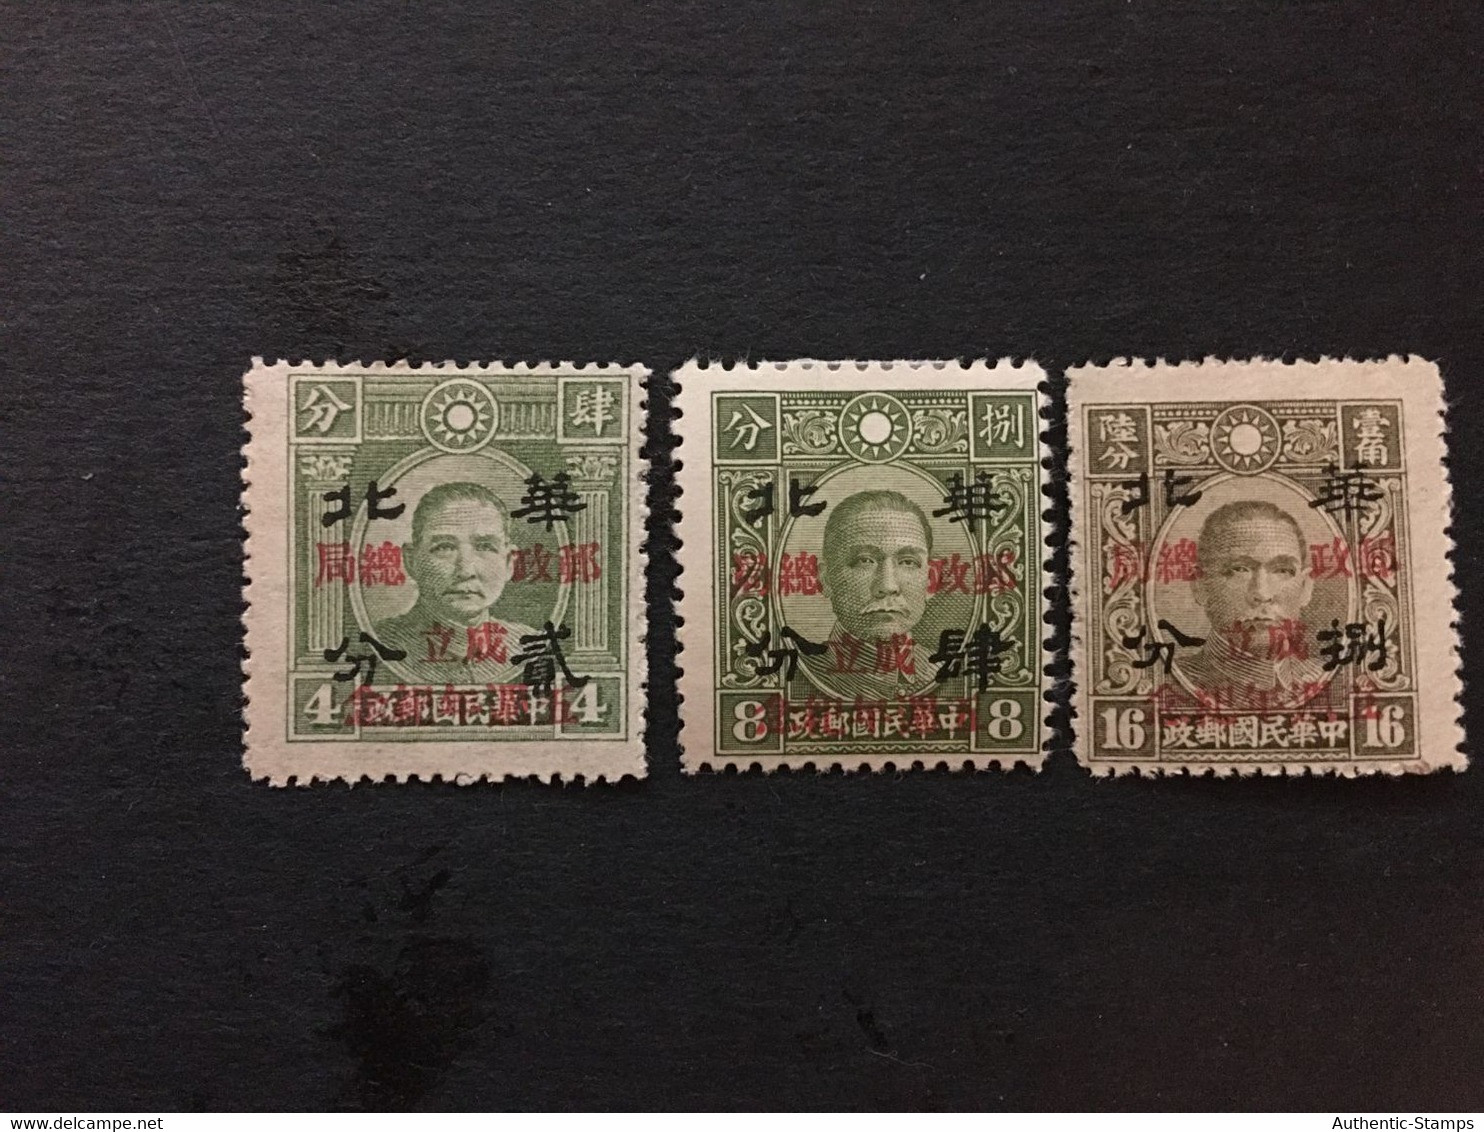 1943 CHINA  STAMP Set,5th Anniversary Of D.G Of Posts, Rare Overprint, Japanese Occupation, MLH, CINA, CHINE,  LIST 1067 - 1941-45 China Dela Norte